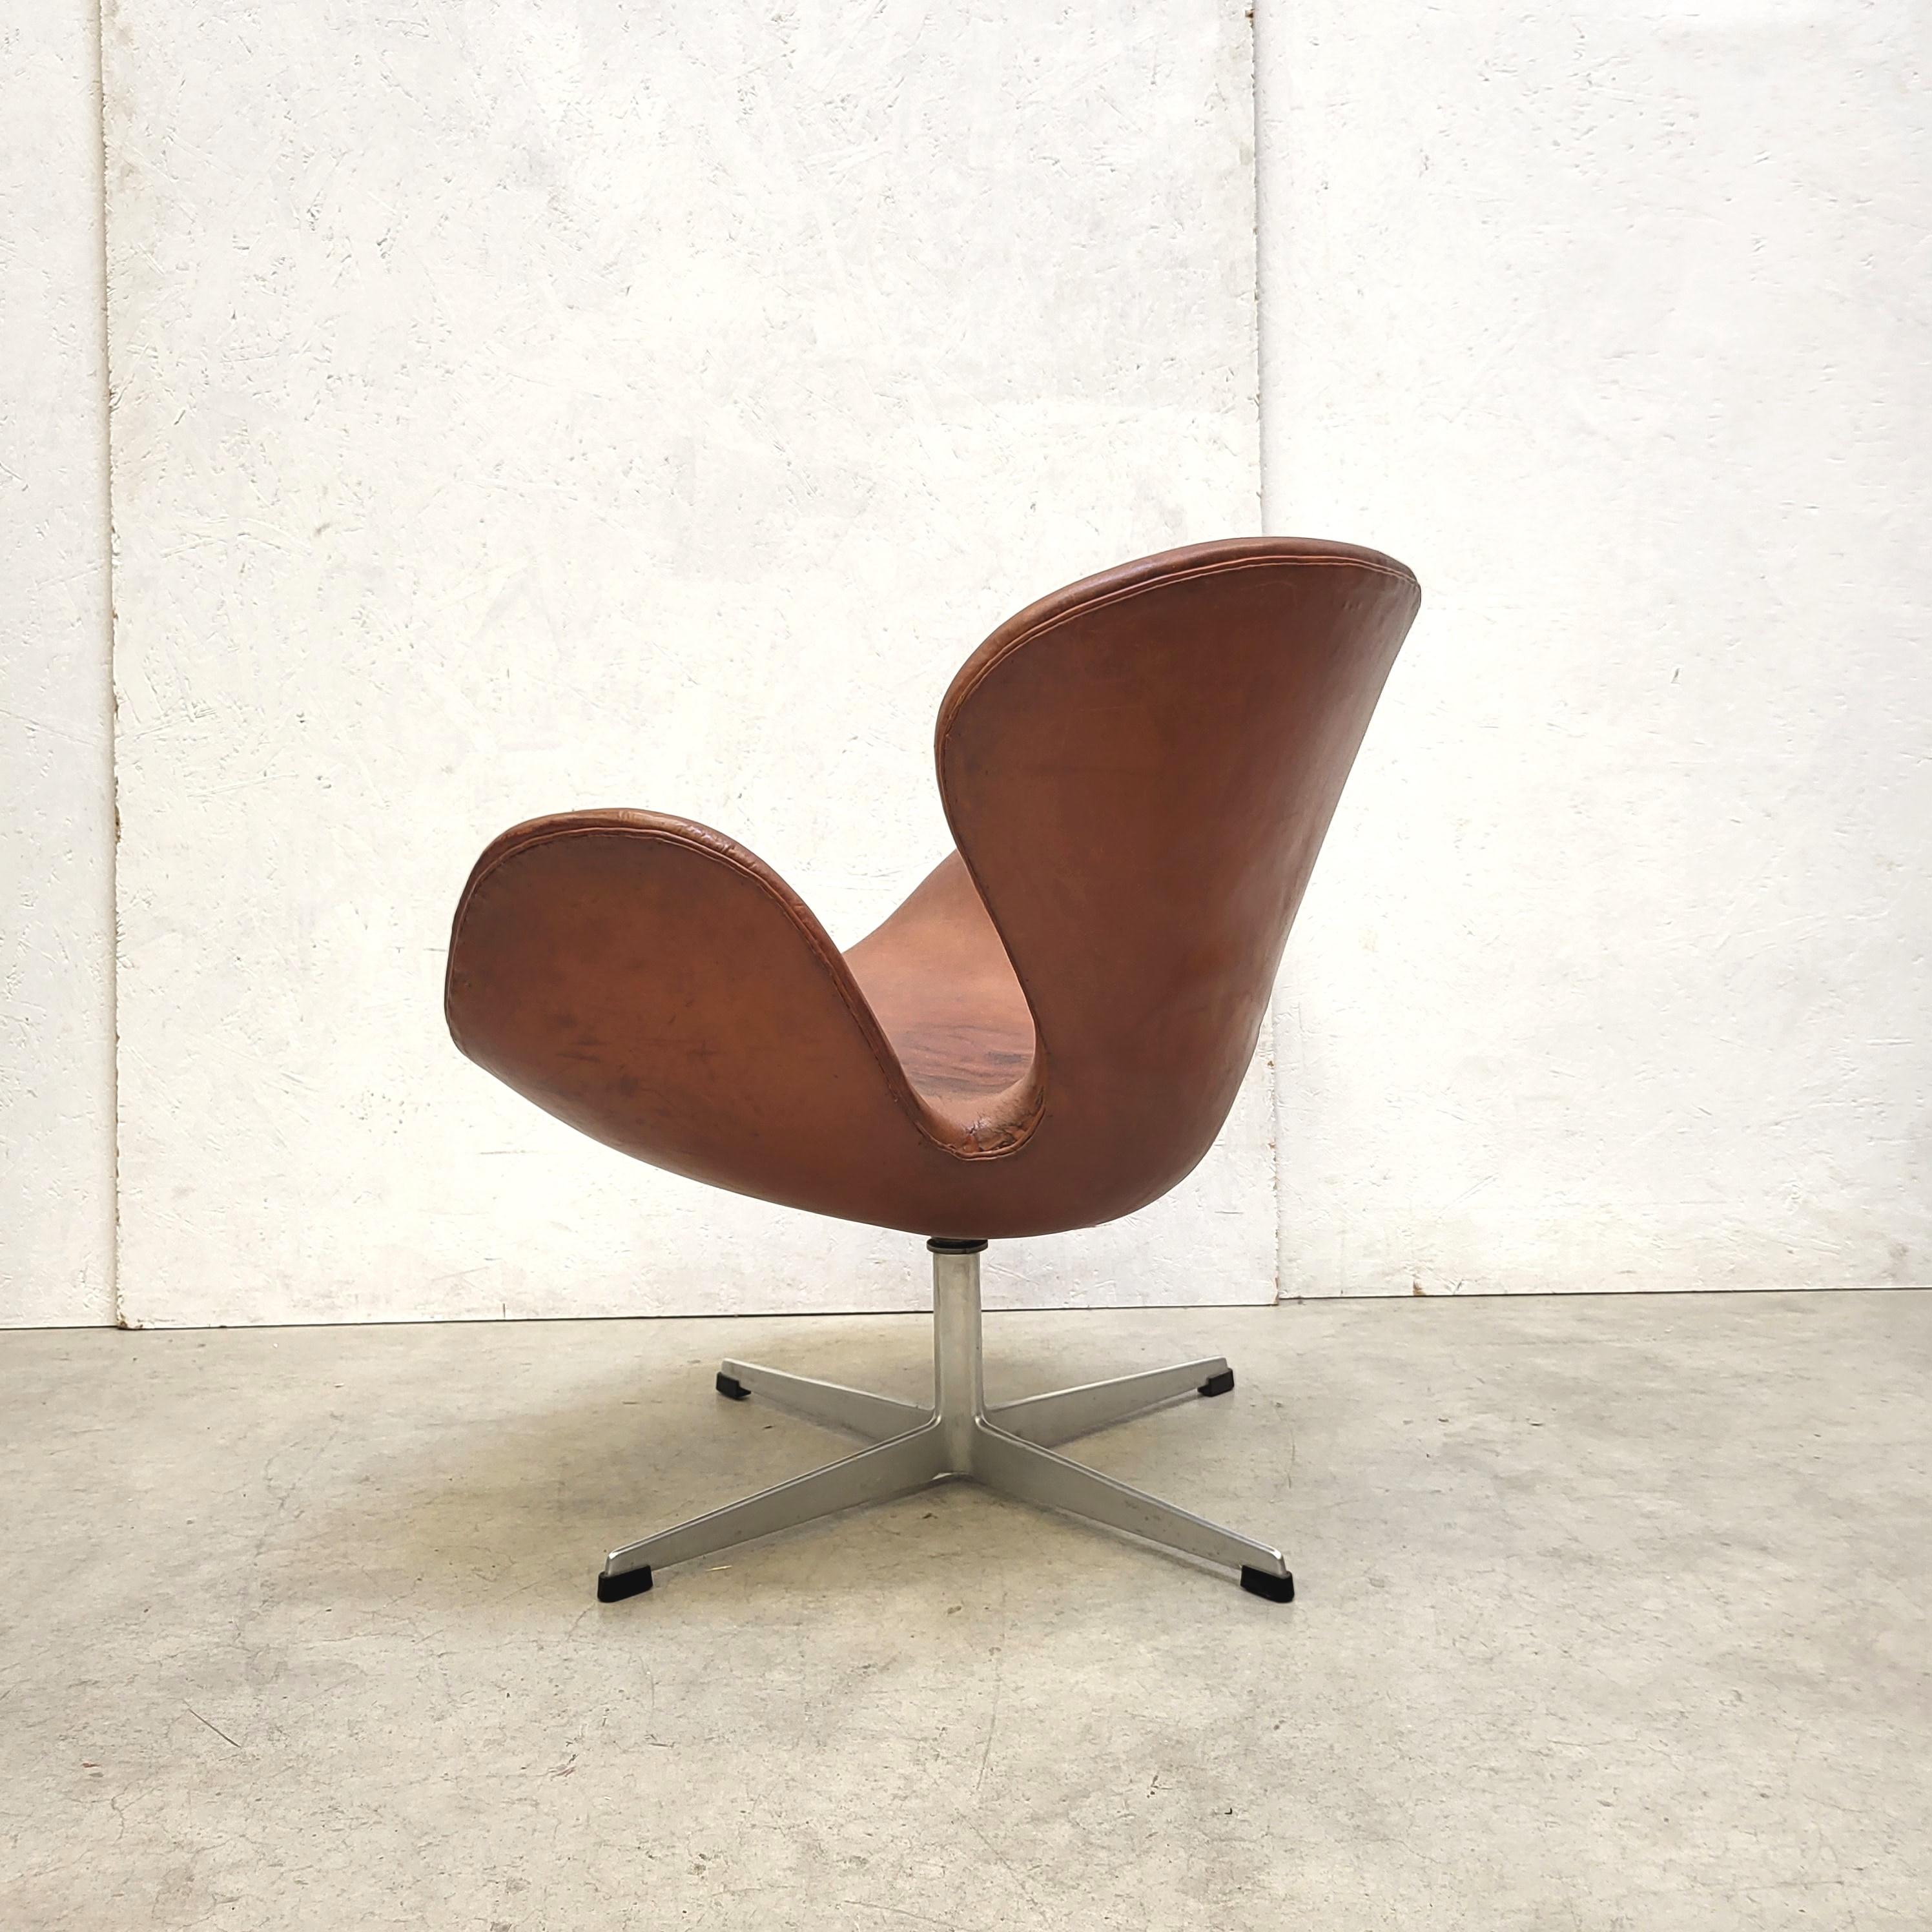 Mid-20th Century 1st Edition Cognac Swan Chair by Arne Jacobsen for Fritz Hansen, 1958 For Sale